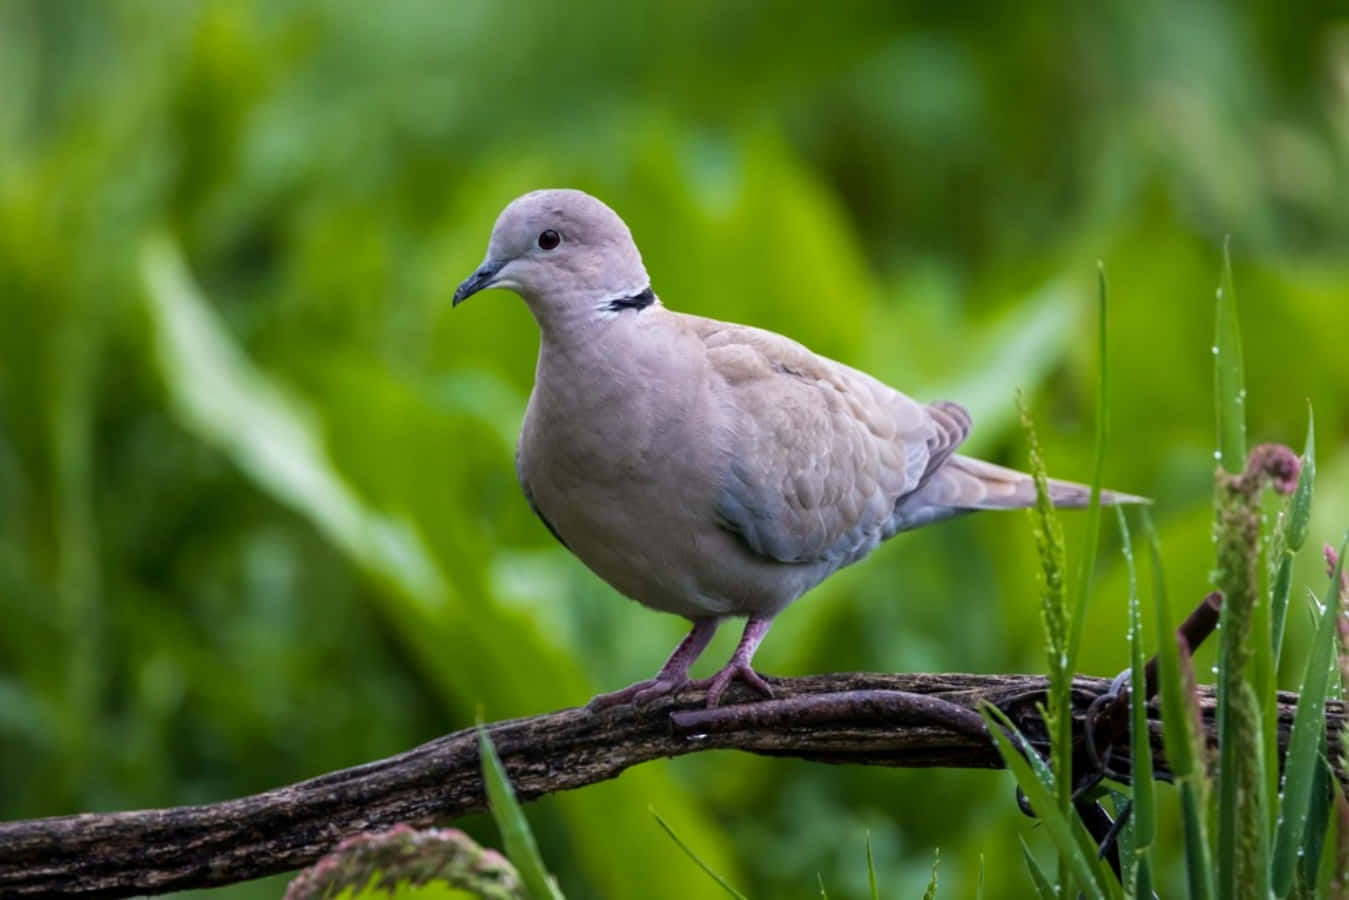 A Dove Is Sitting On A Branch In The Grass